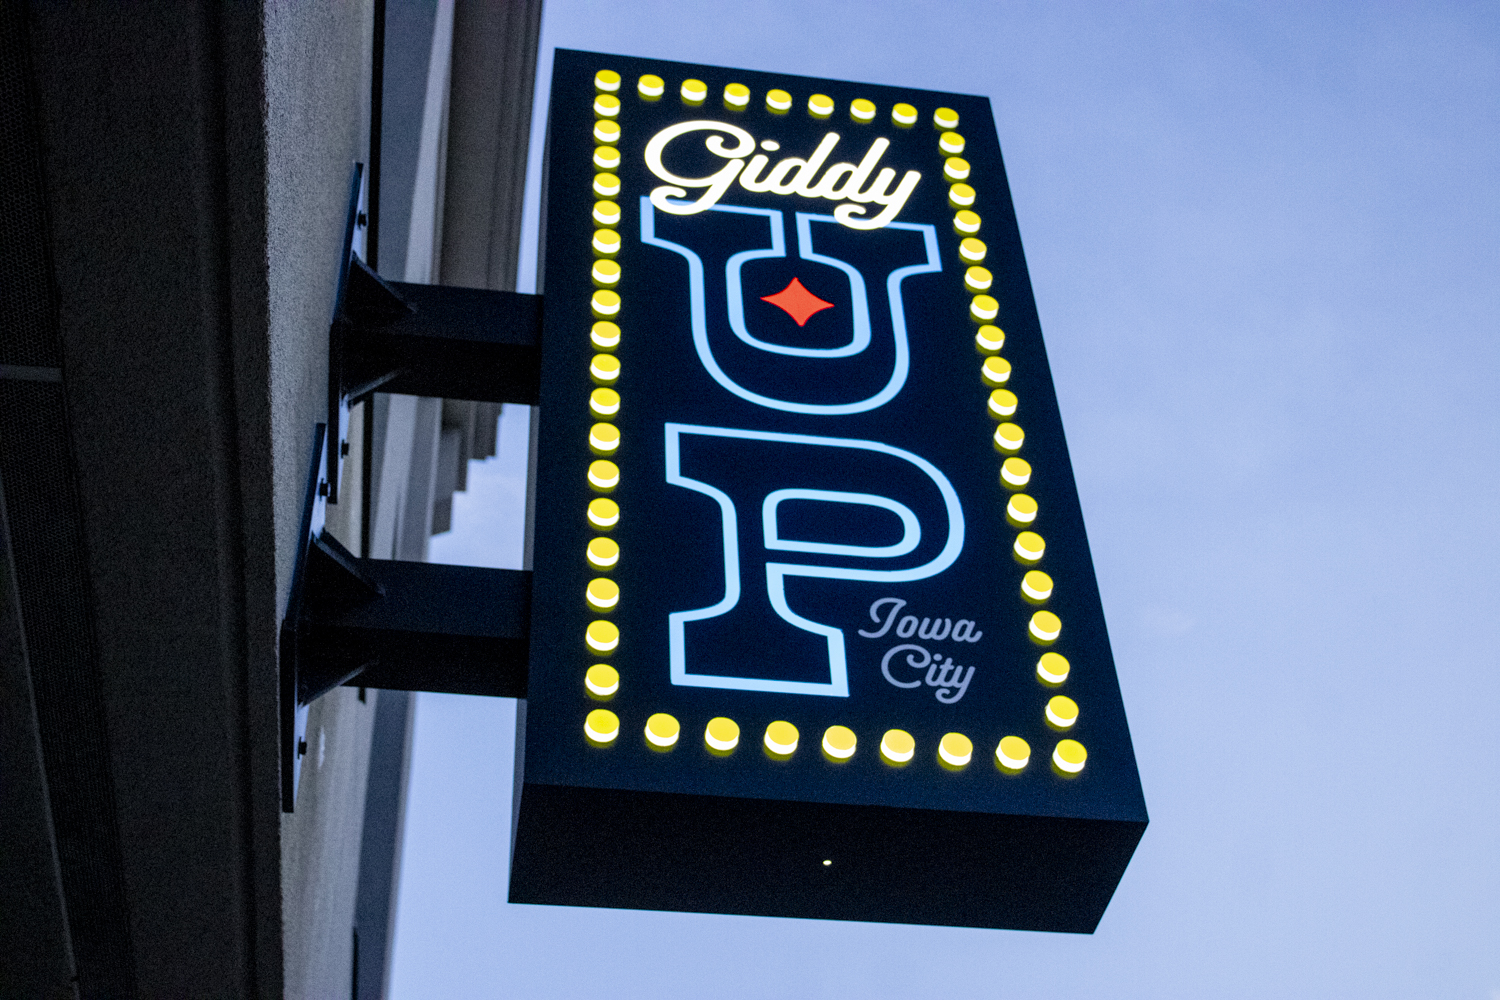 Giddy Up, a country-themed bar on Clinton St., prepares to open this month in downtown Iowa City on Wednesday, Feb. 7th. The new establishment takes the place of where the sports bar Pints used to be.